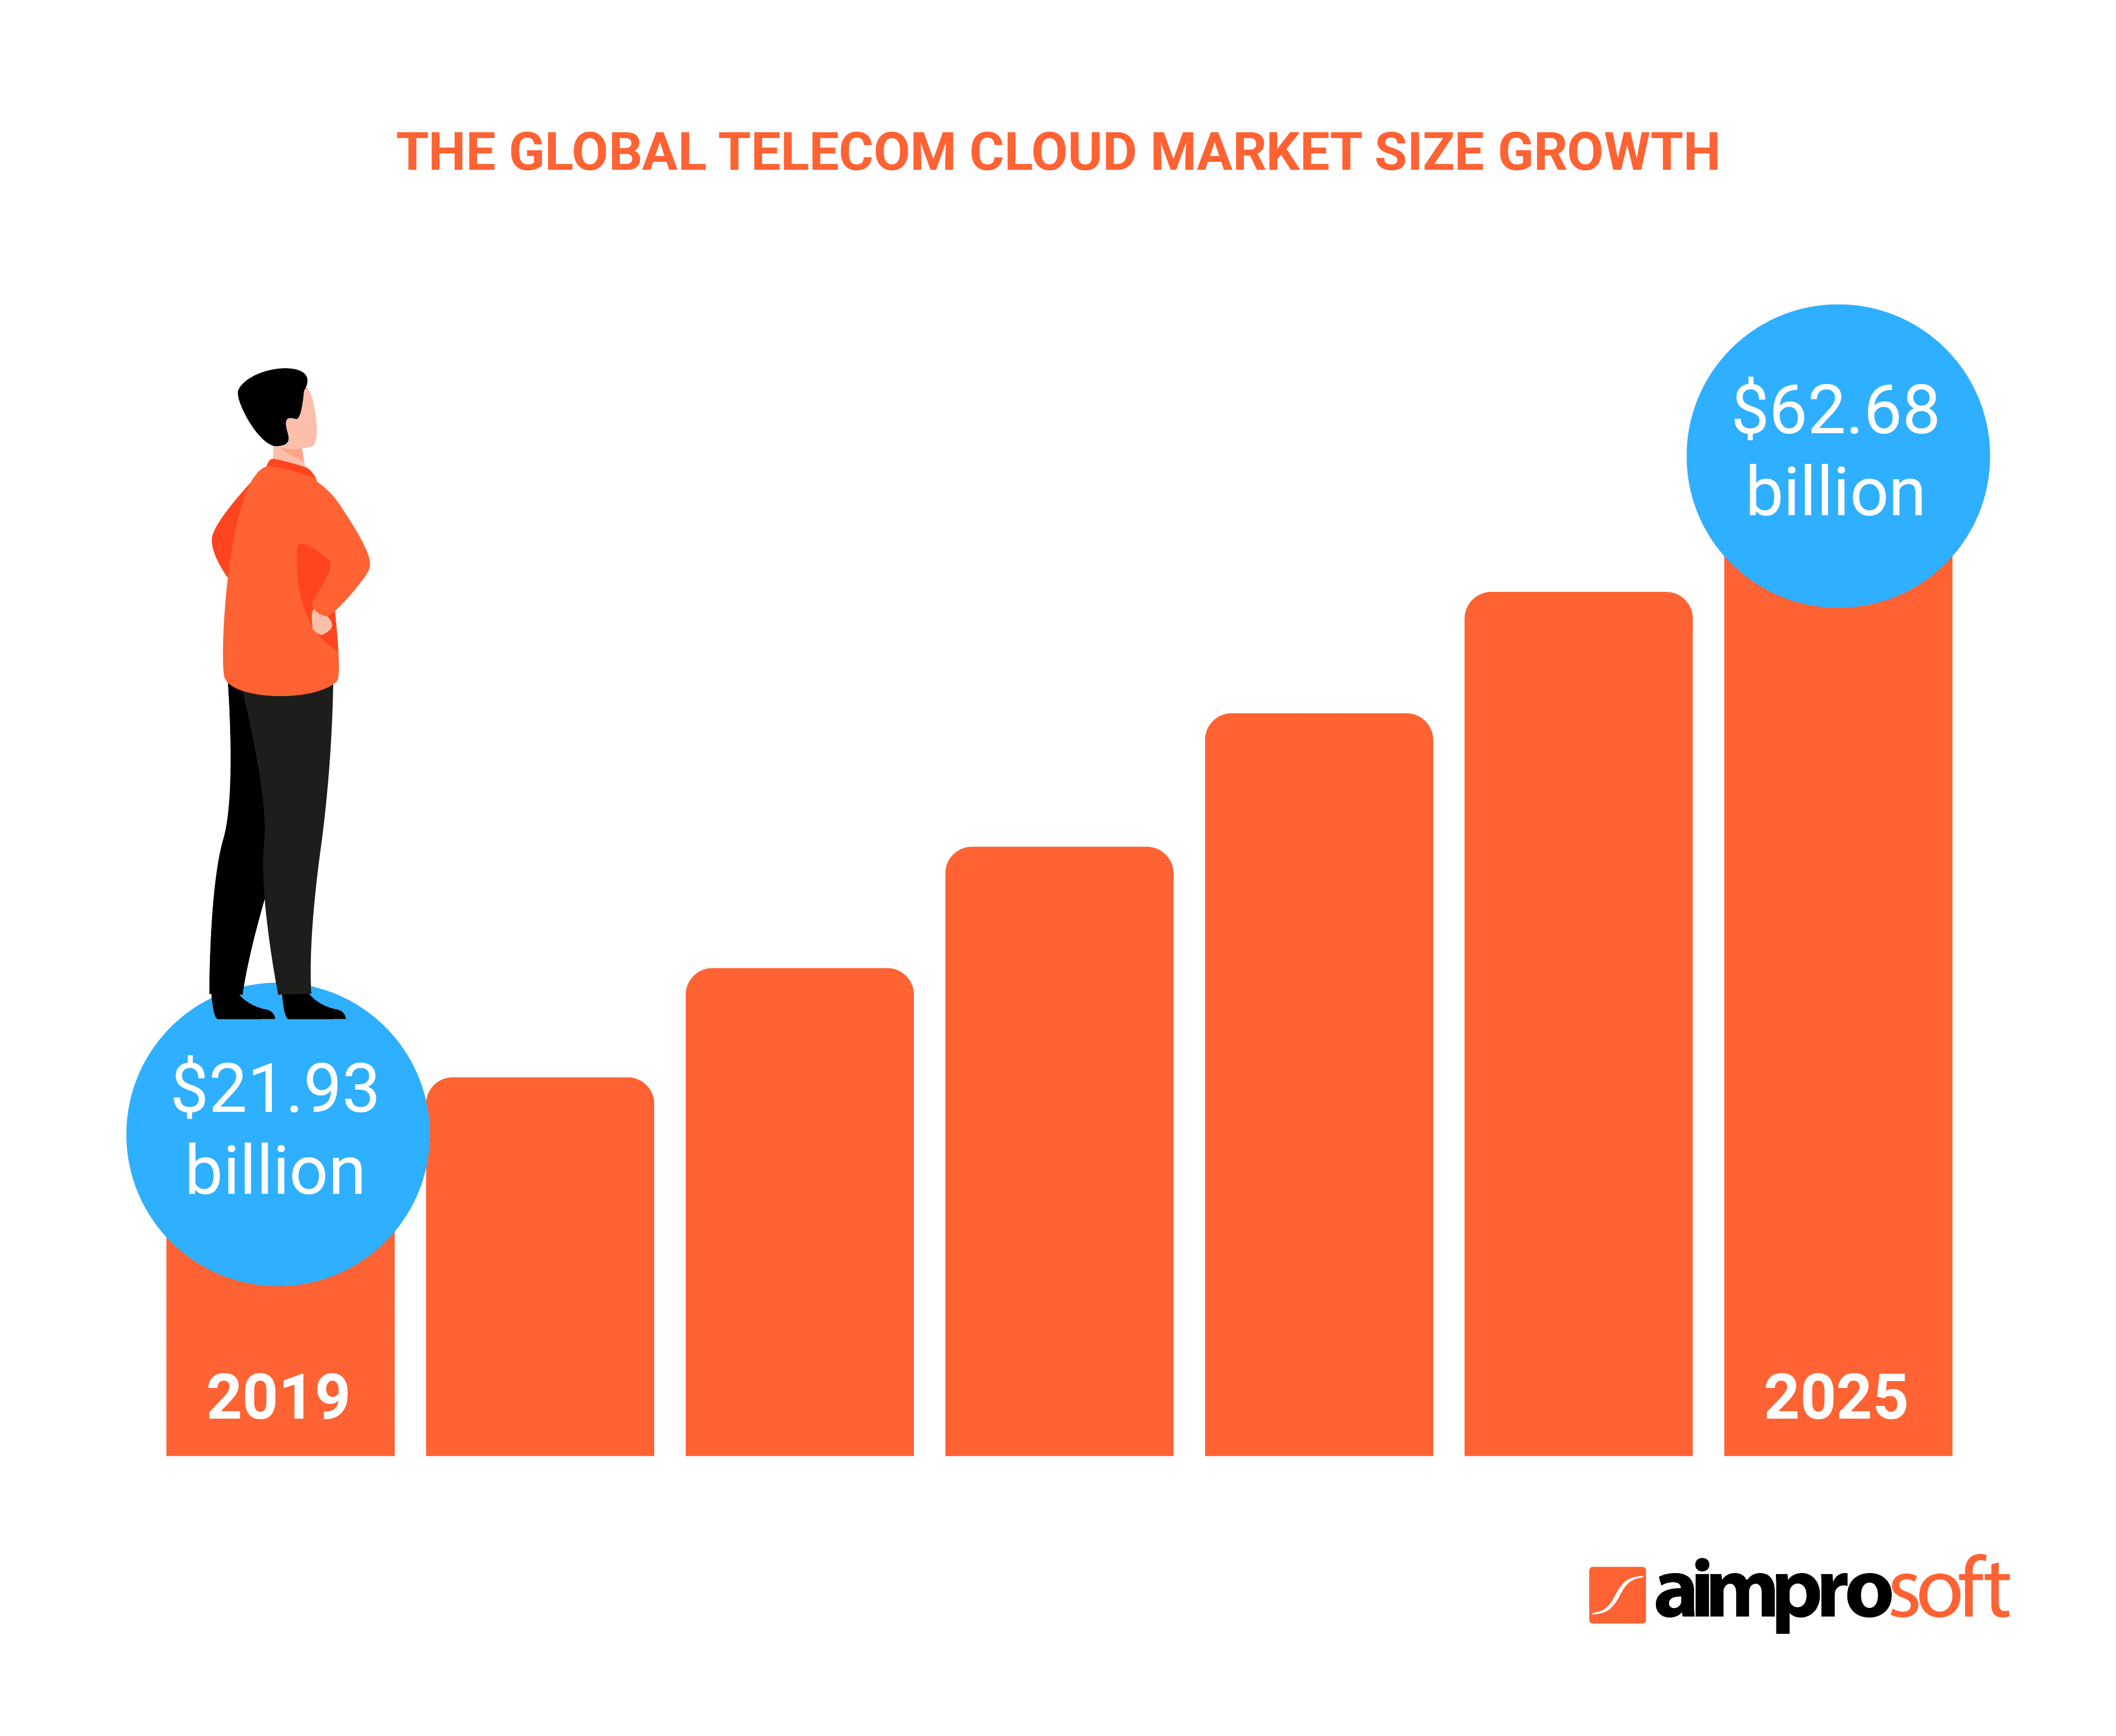 The global telecom cloud services market size growth